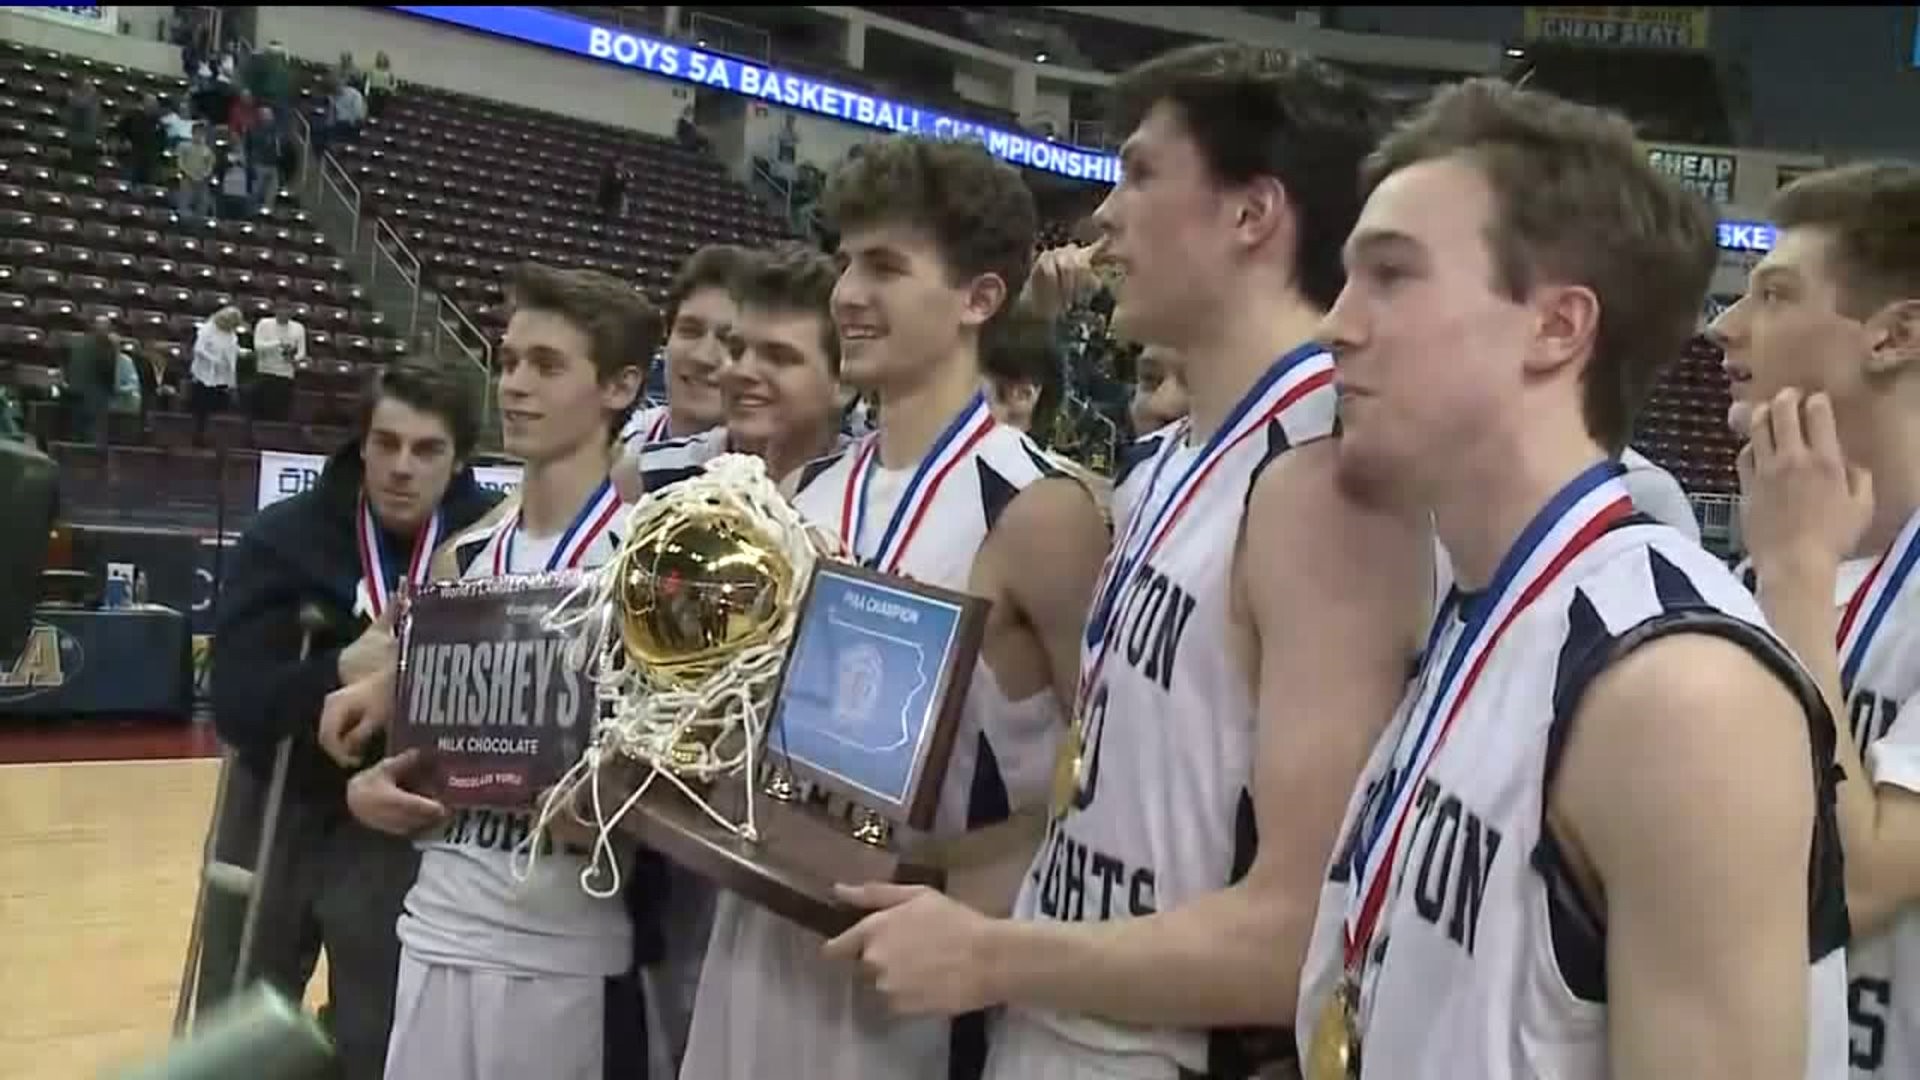 Abington Heights Wins State Title in Boys Basketball